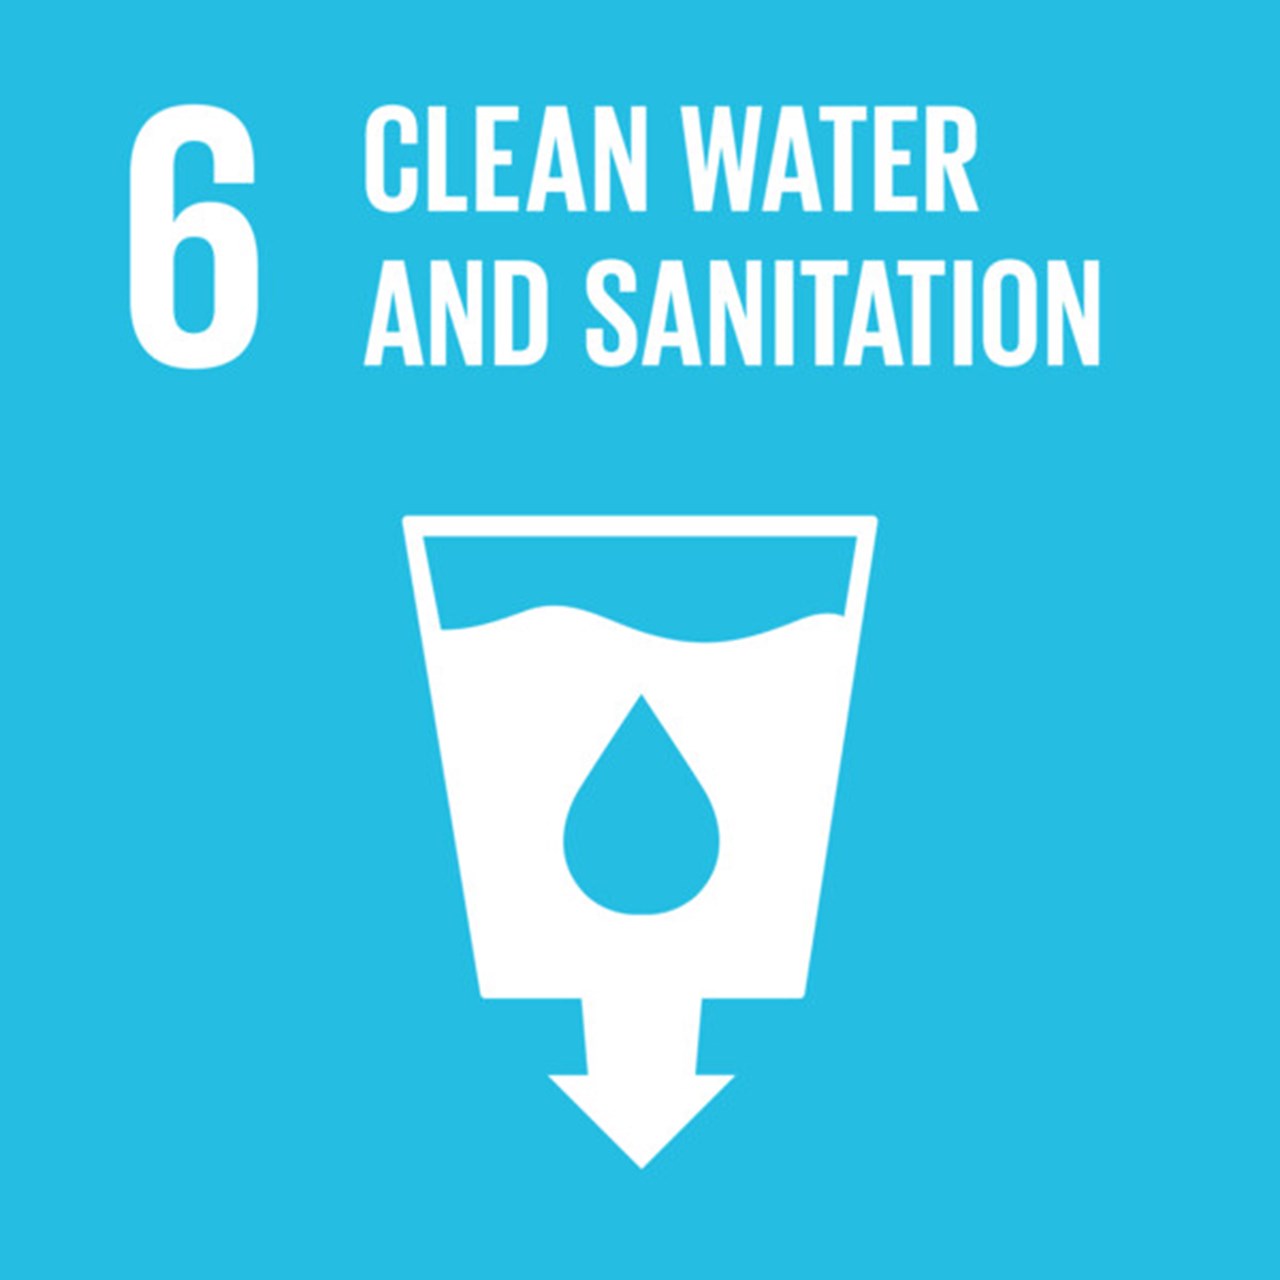 The Global Goals, Goal 6 - Clean Water and Sanitation